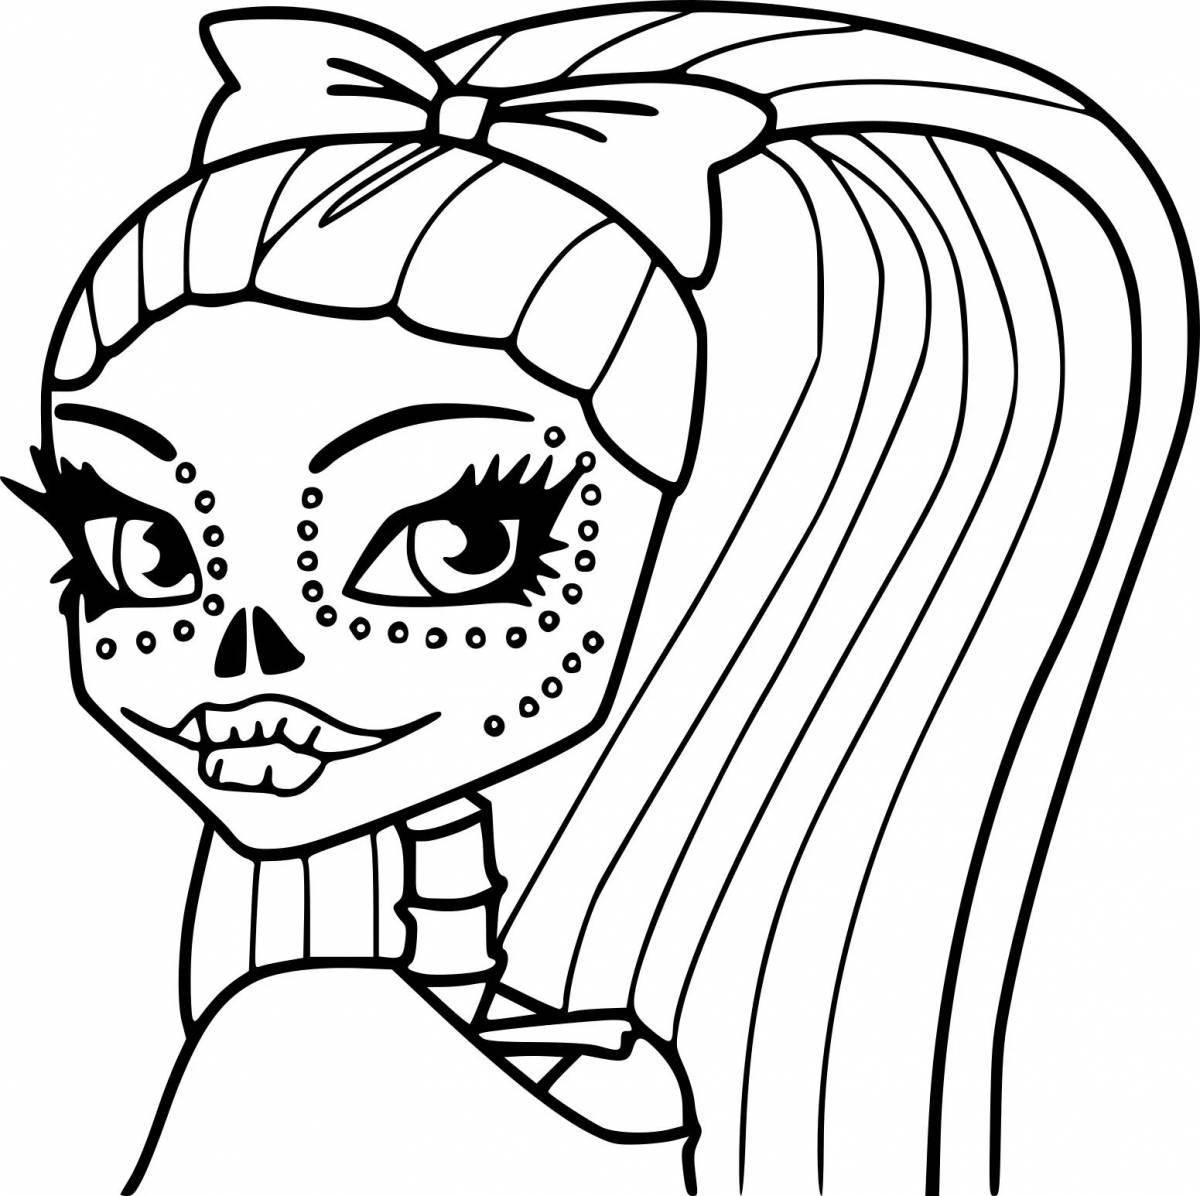 Scary coloring book for girls